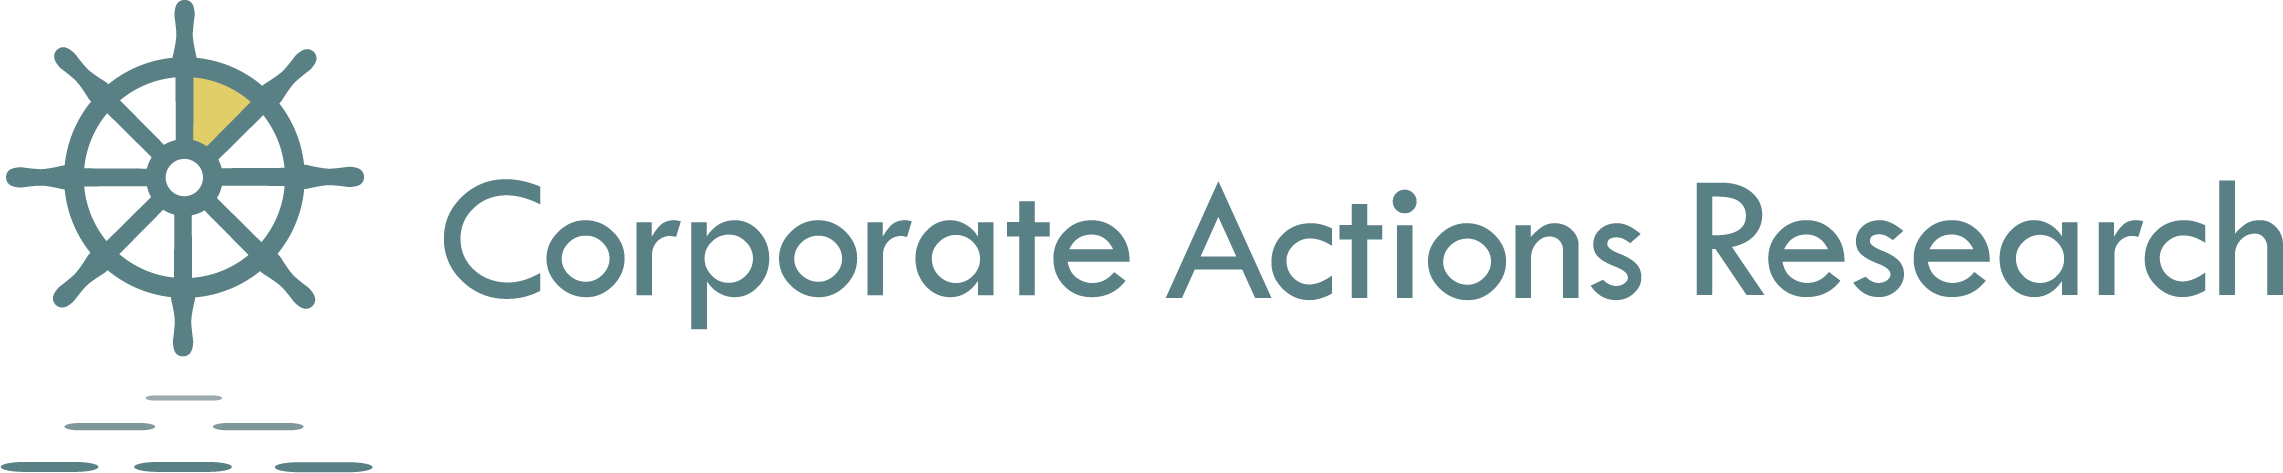 Corporate Actions Research, Inc.